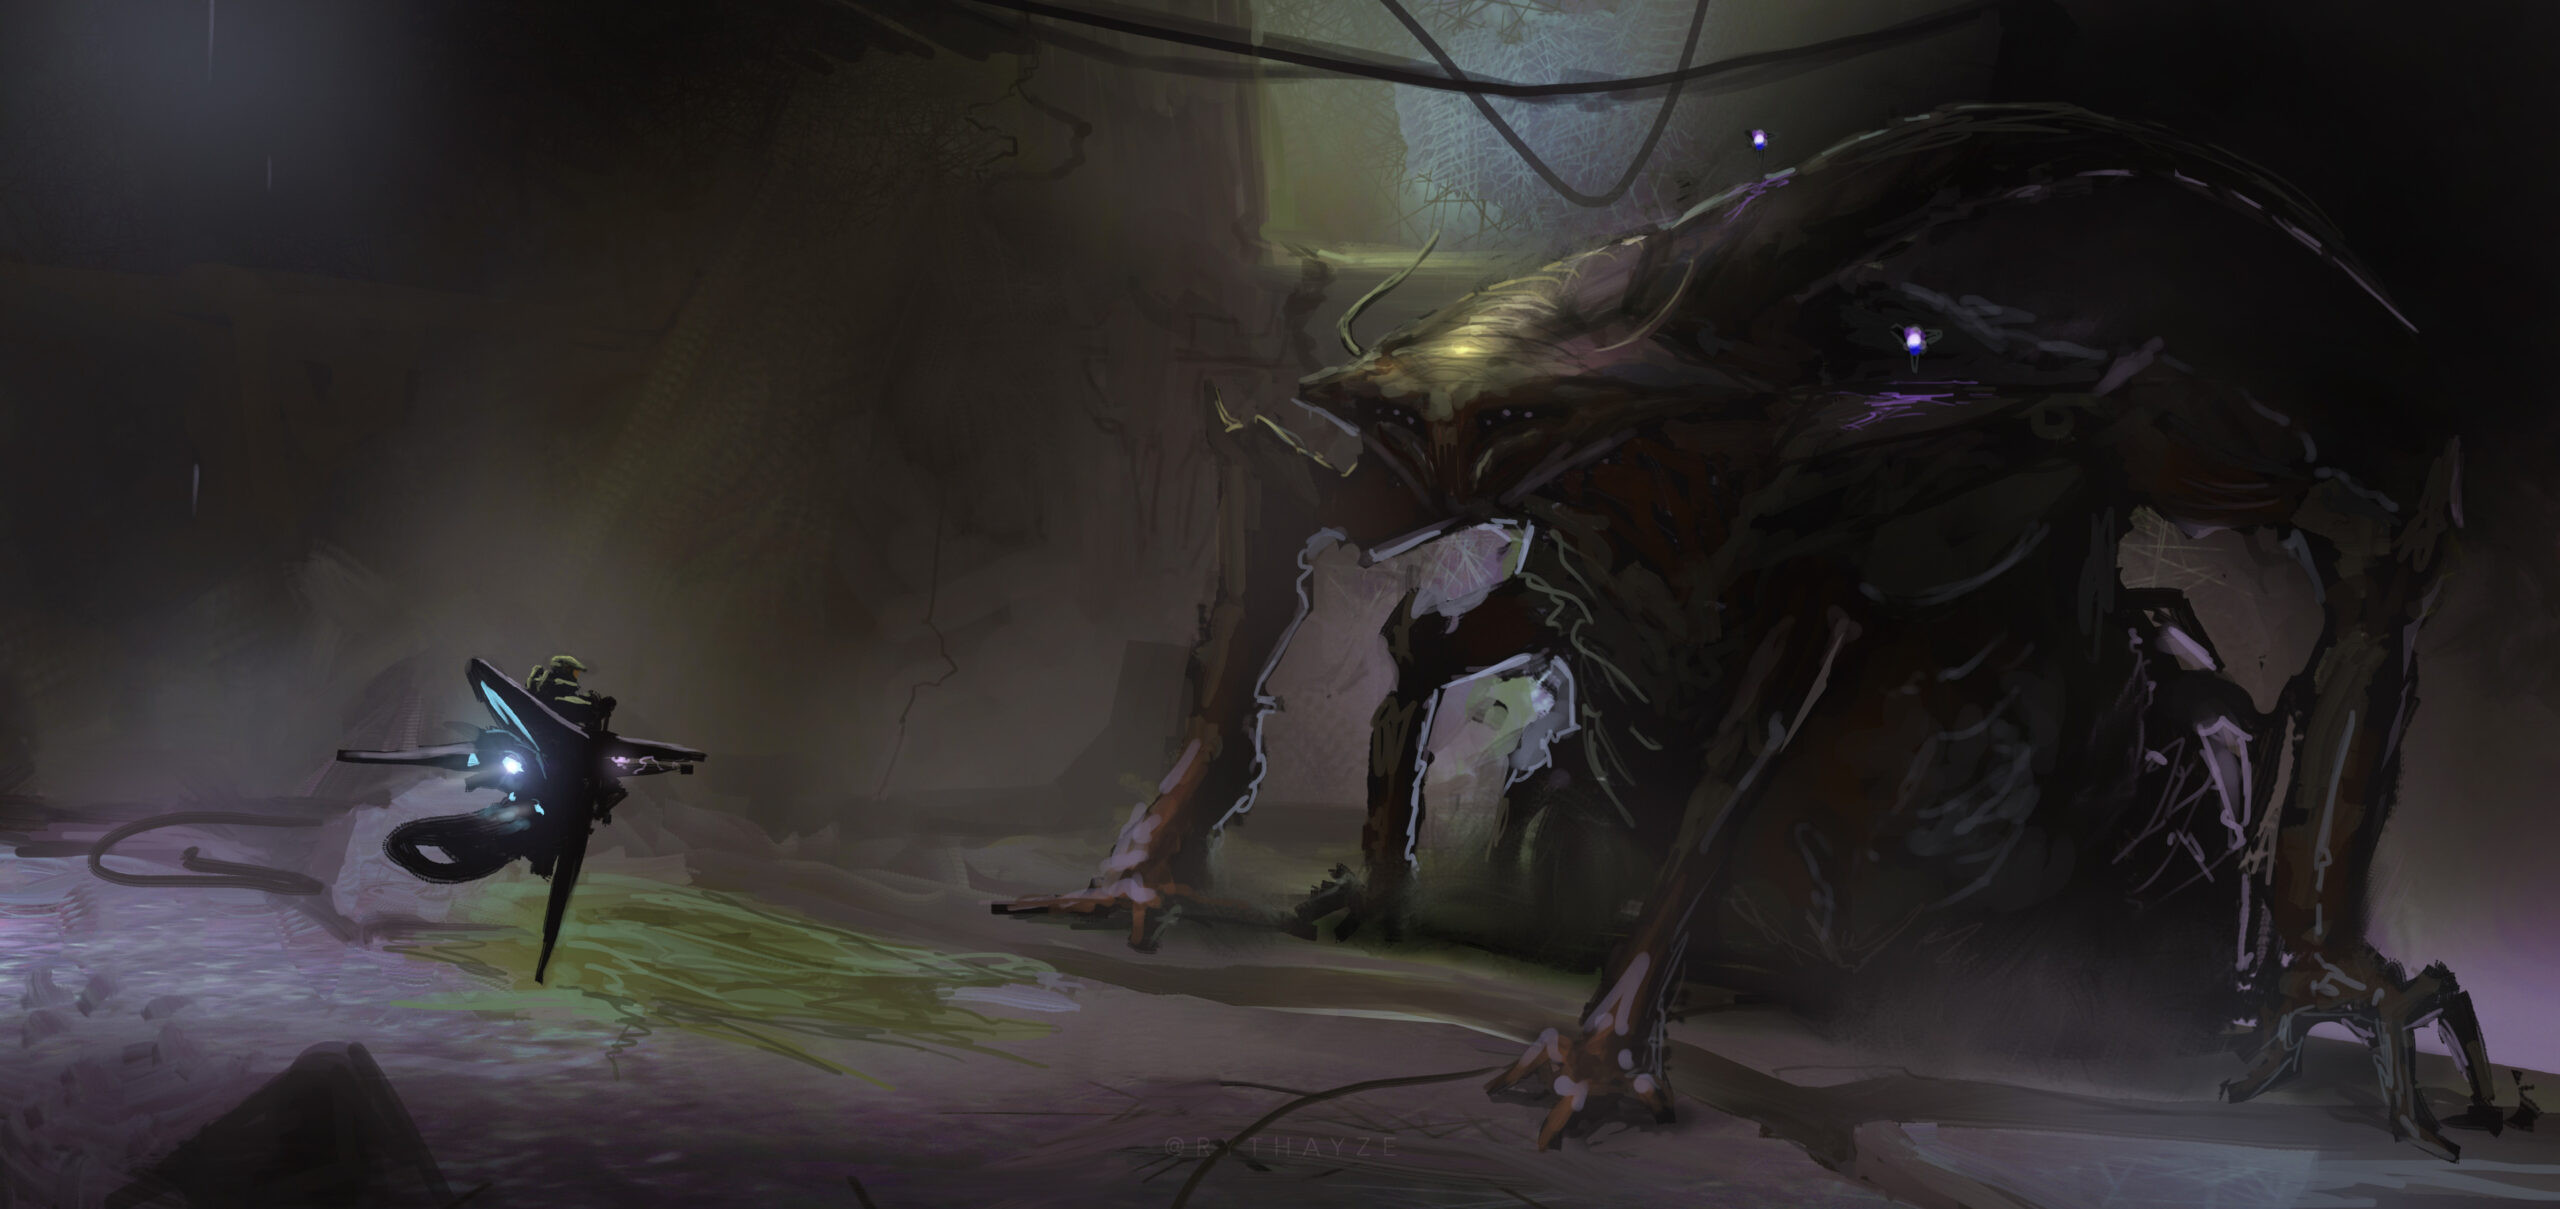 Fan art by Rythaze of the Master Chief encountering the Primordial